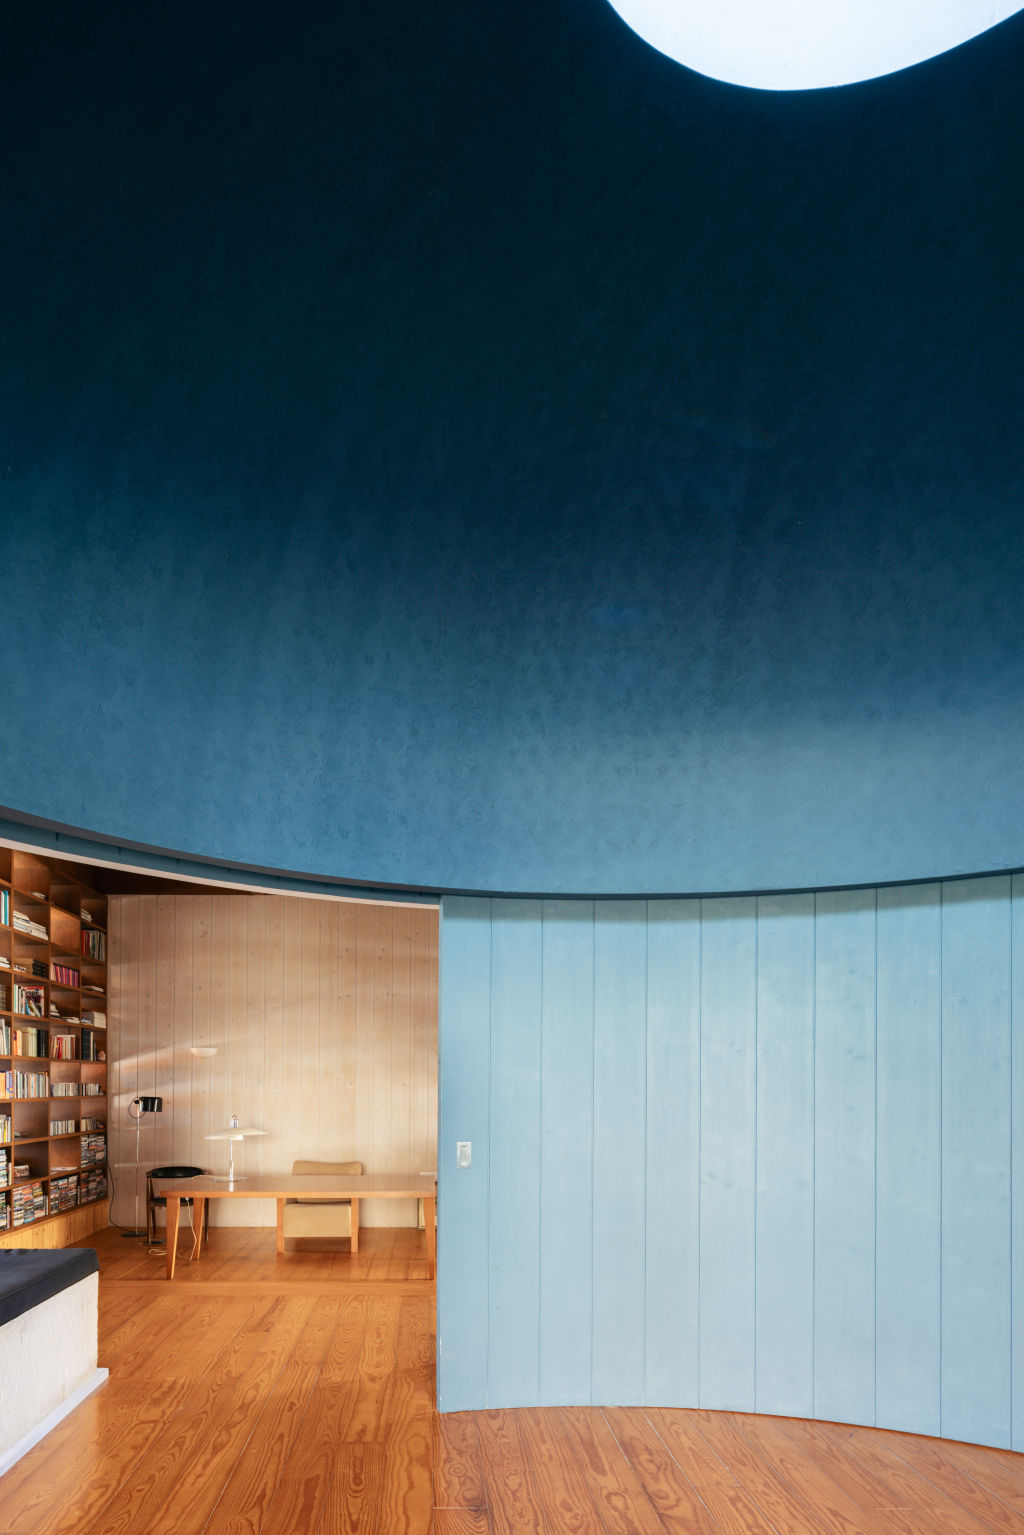 The circular blue meditation space completes the home. Photo: Luis Nobre Guedes